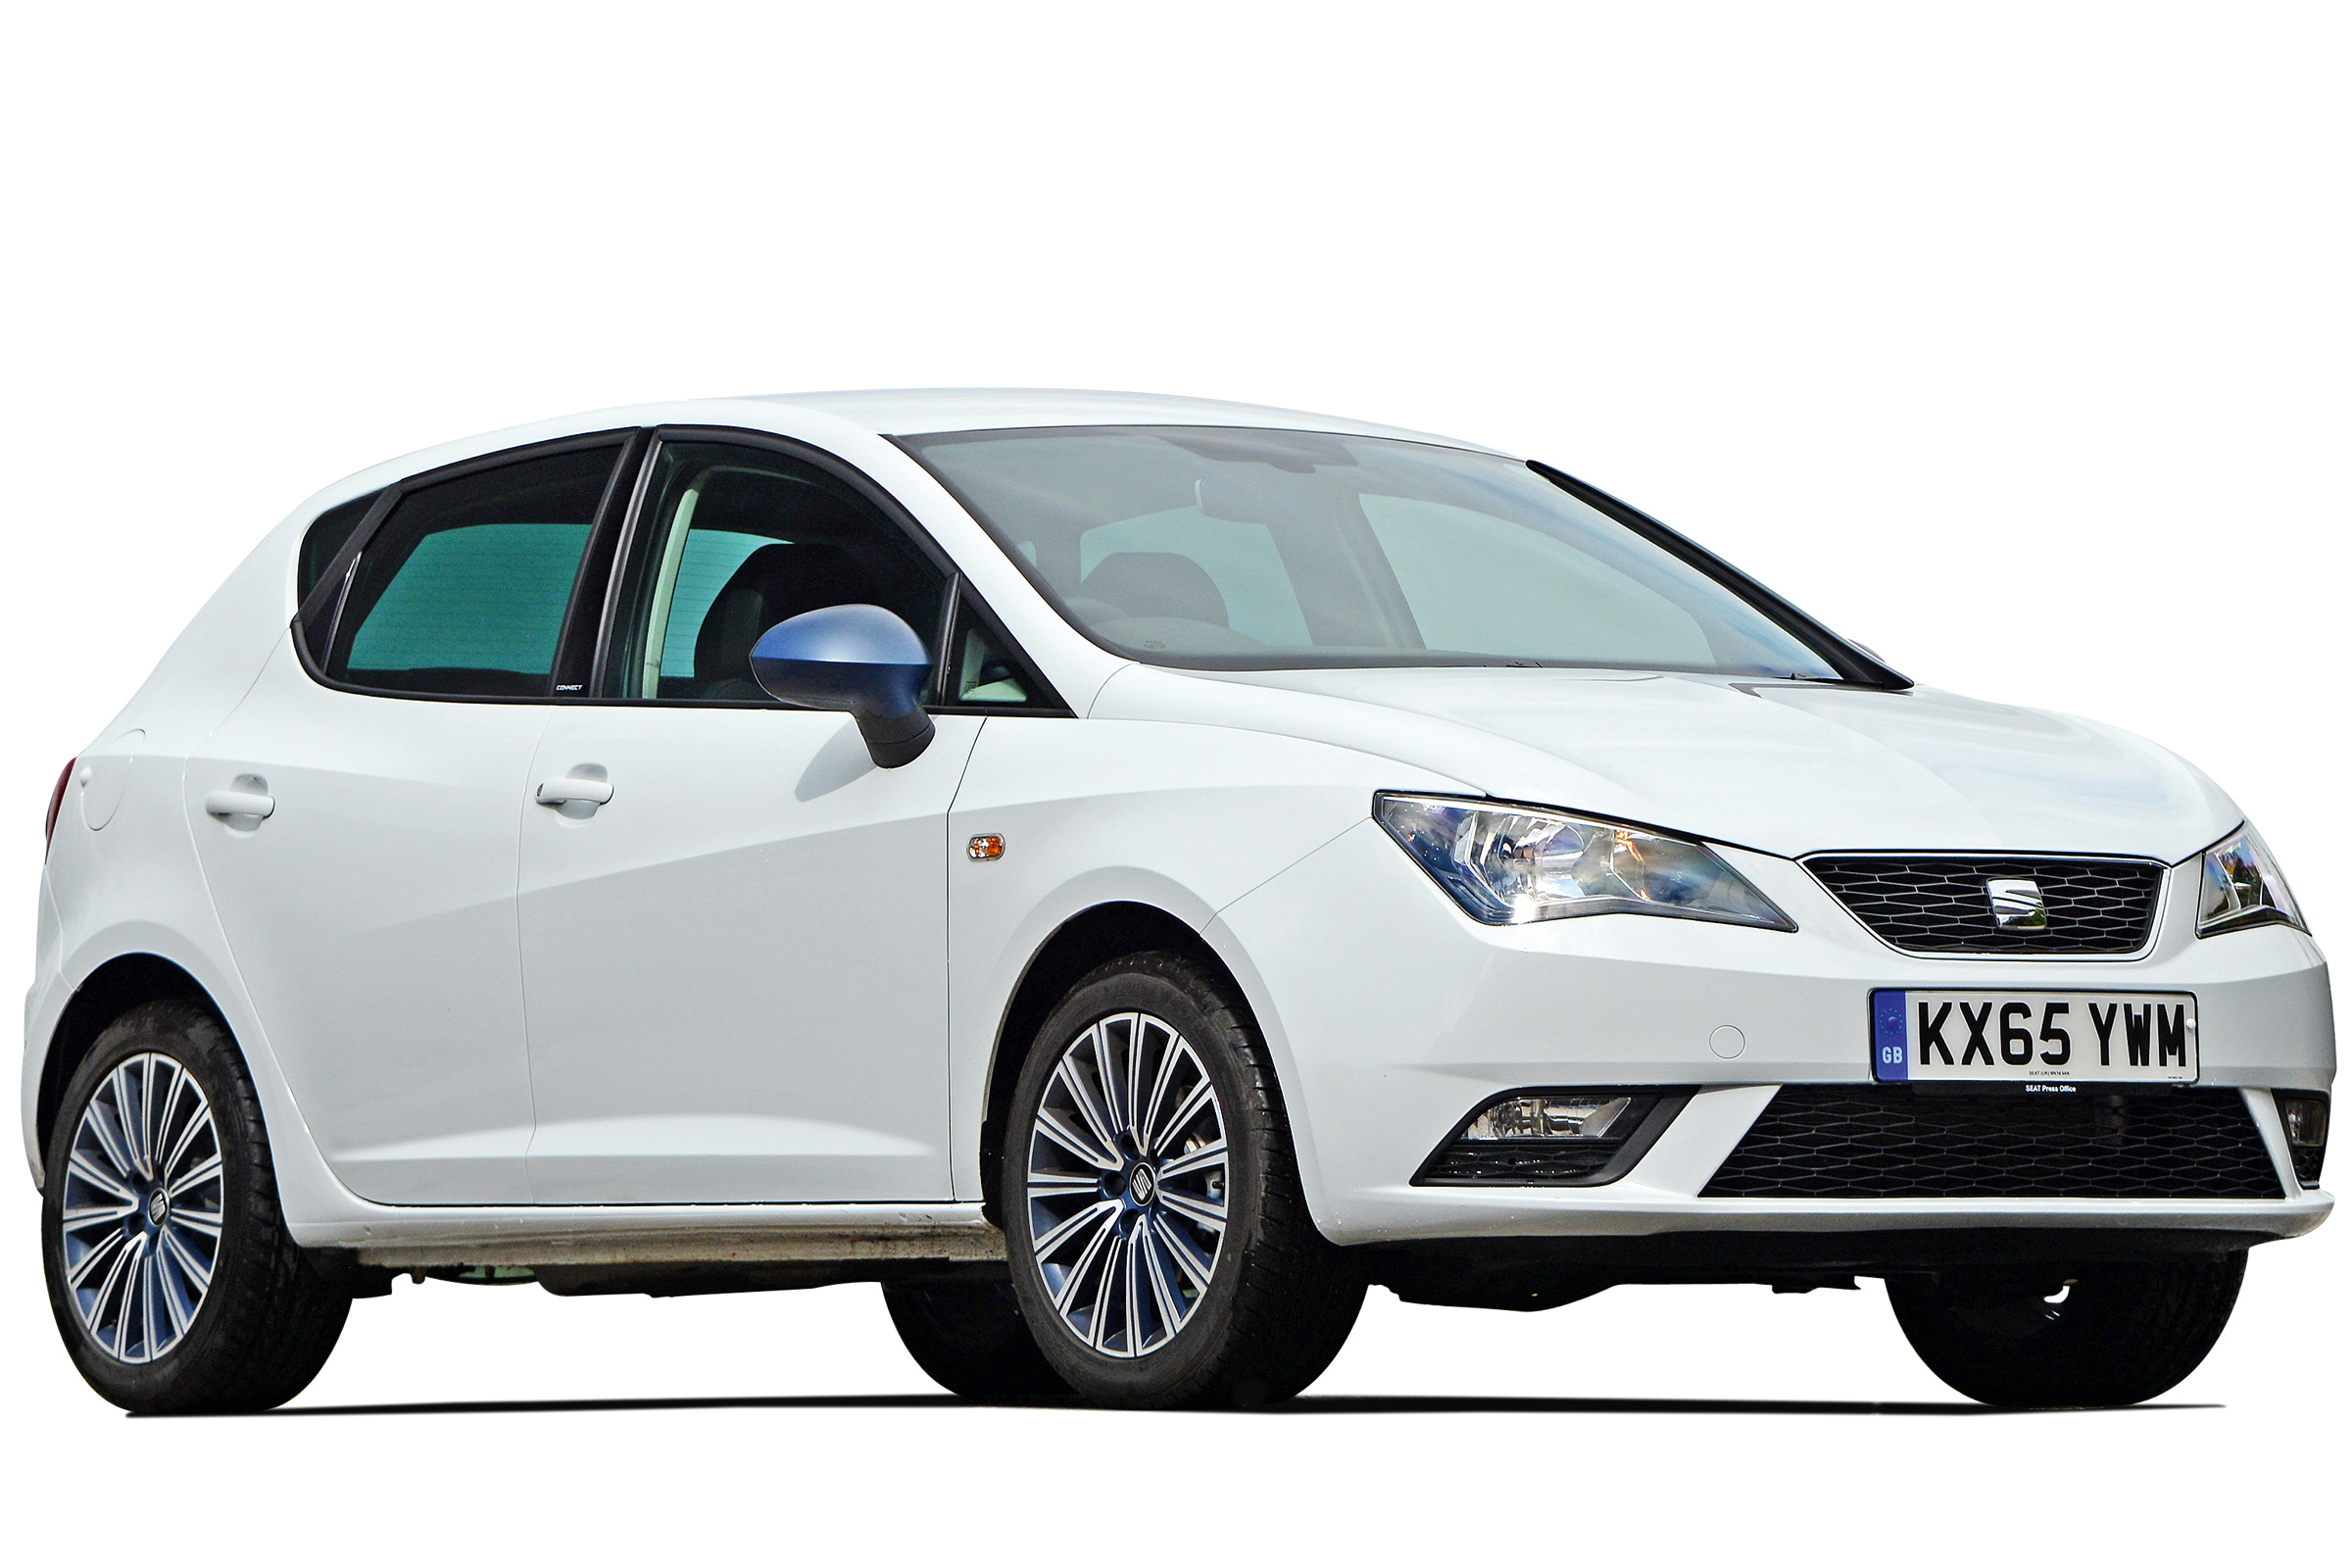 Seat Ibiza Hatchback 08 17 Owner Reviews Mpg Problems Reliability Carbuyer